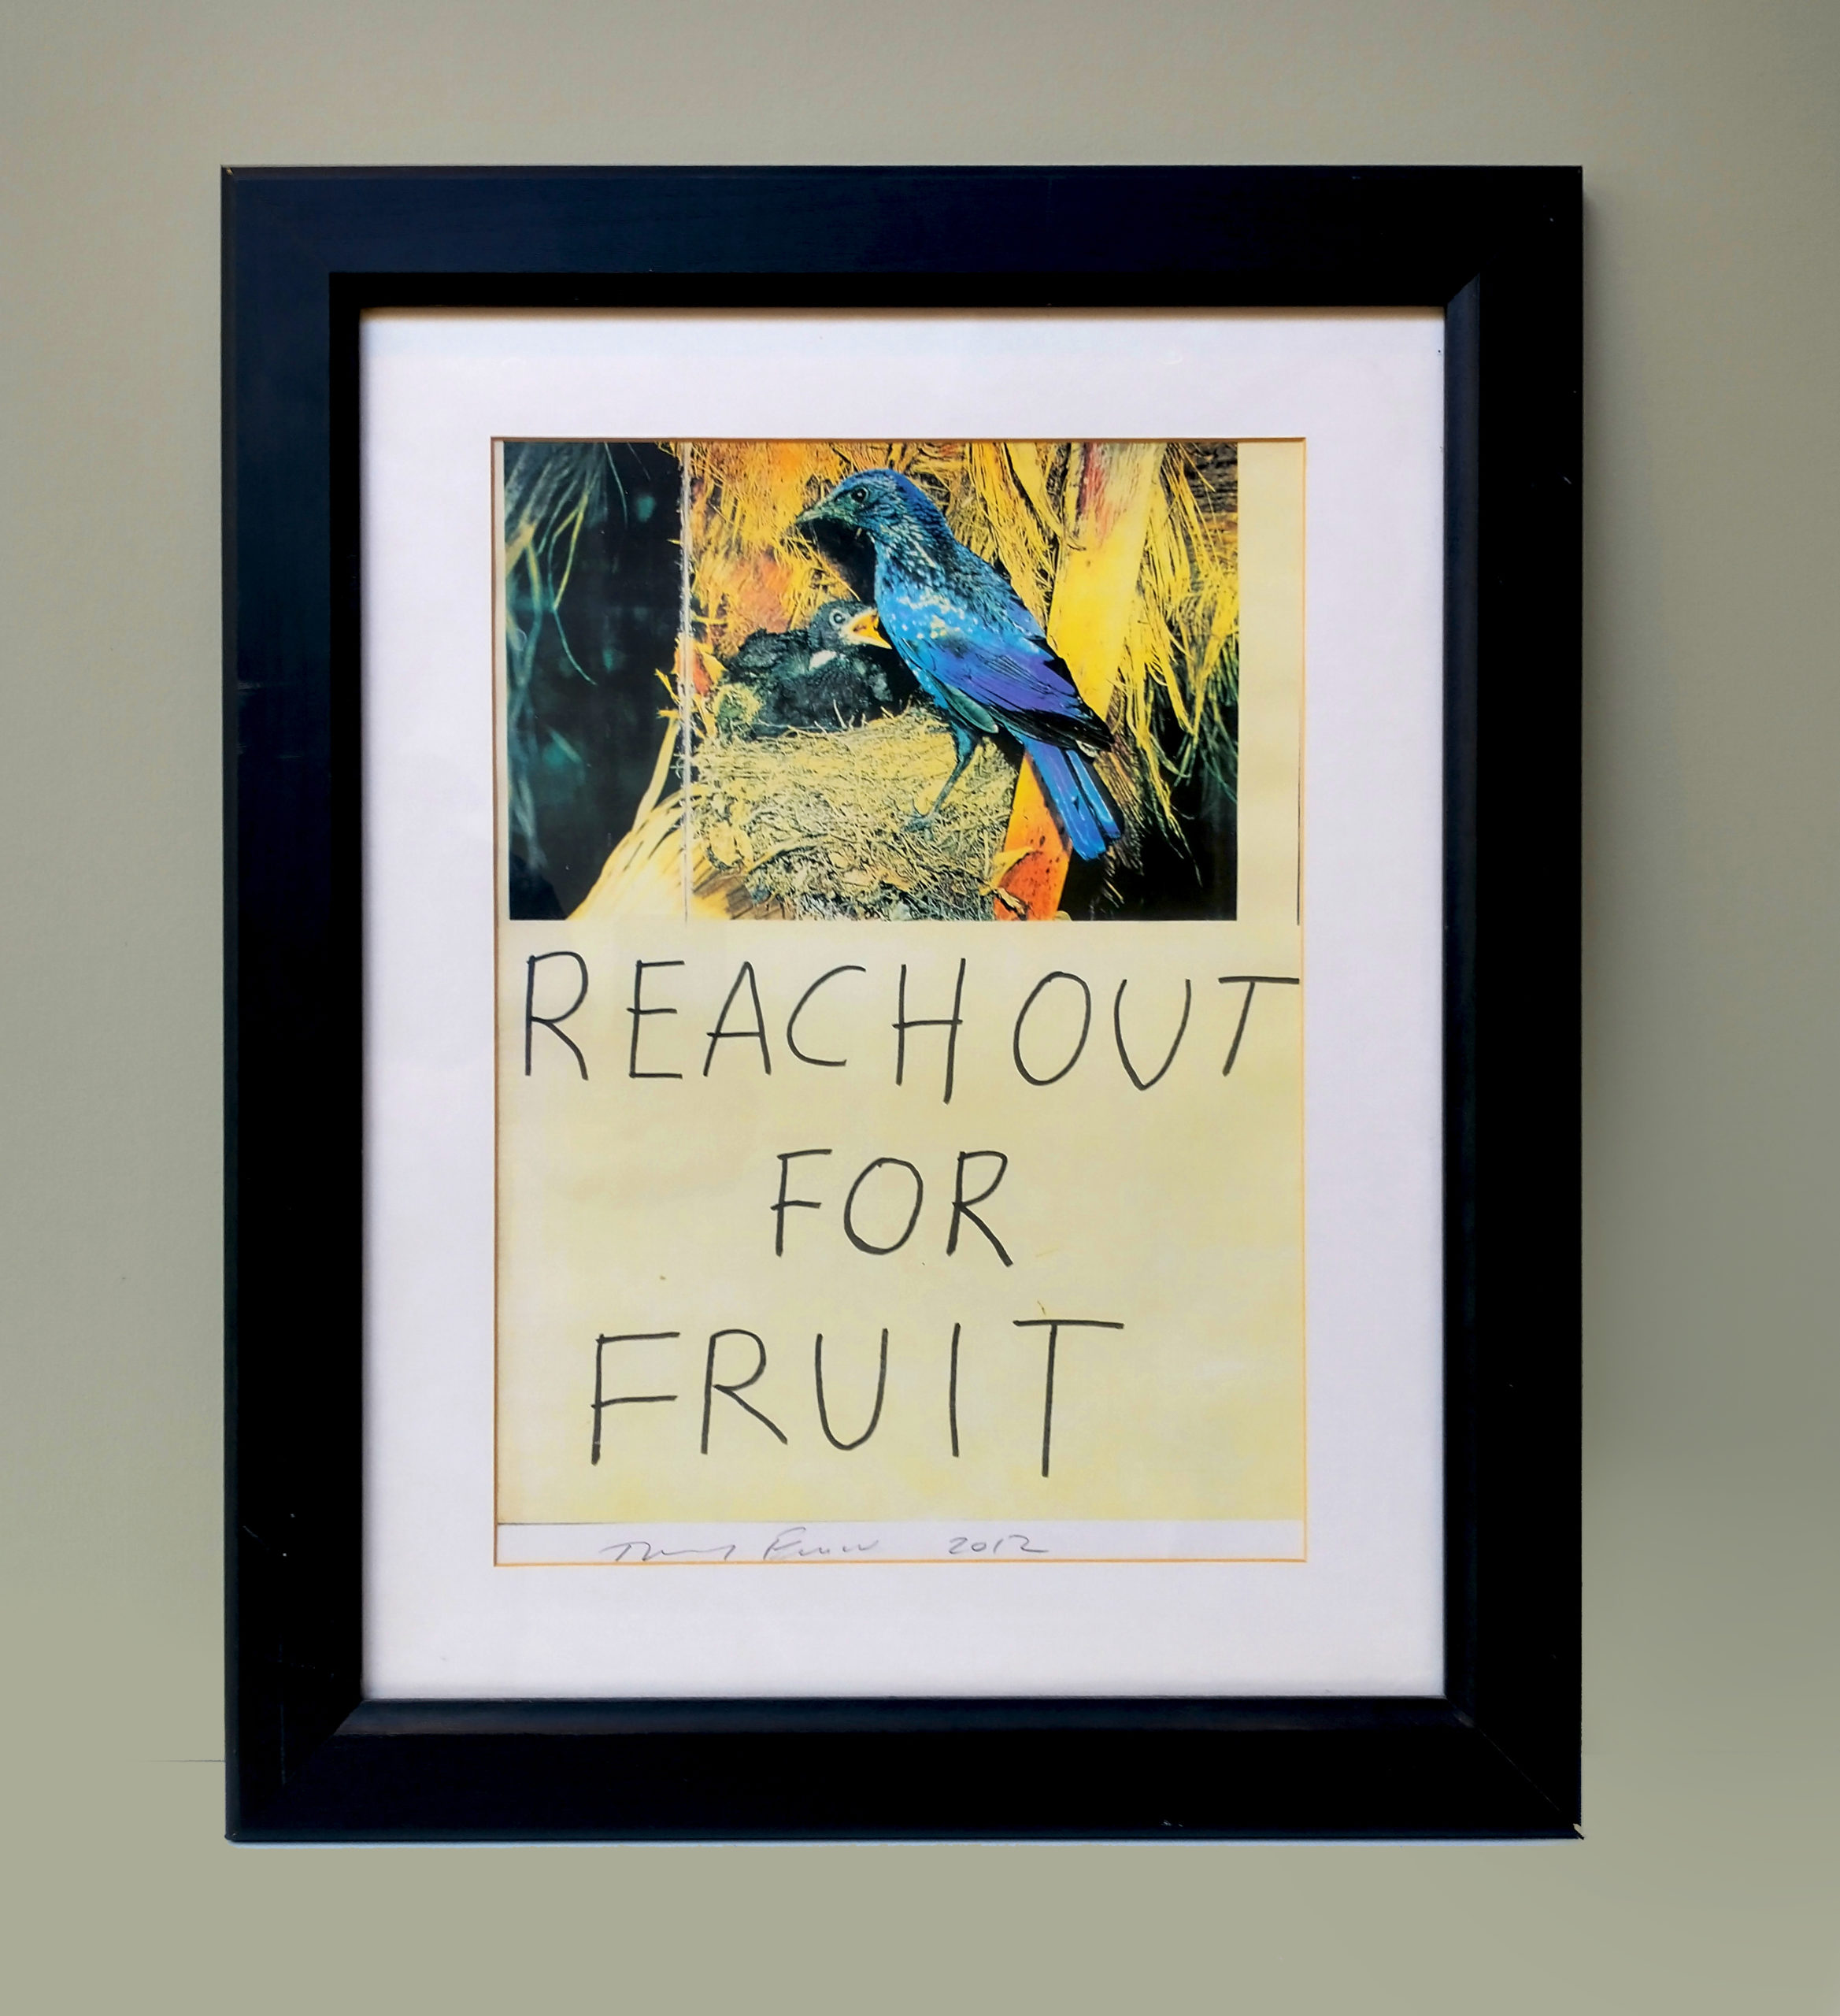 Tracey Emin – Reach Out For Fruit